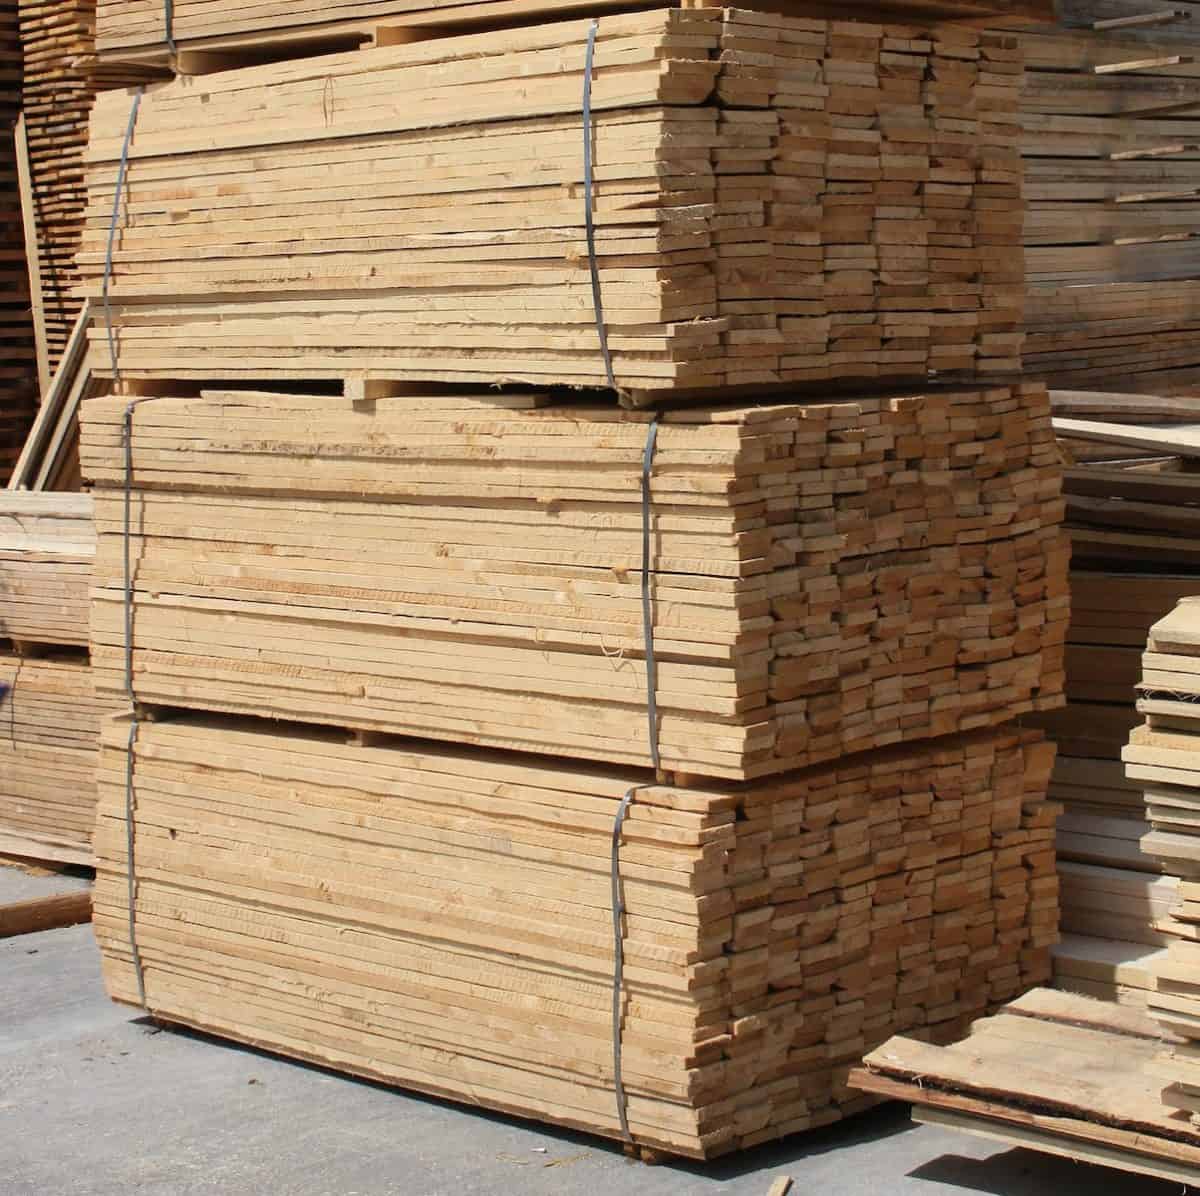 The Lumber Supply Chain is Going Against the Grain!